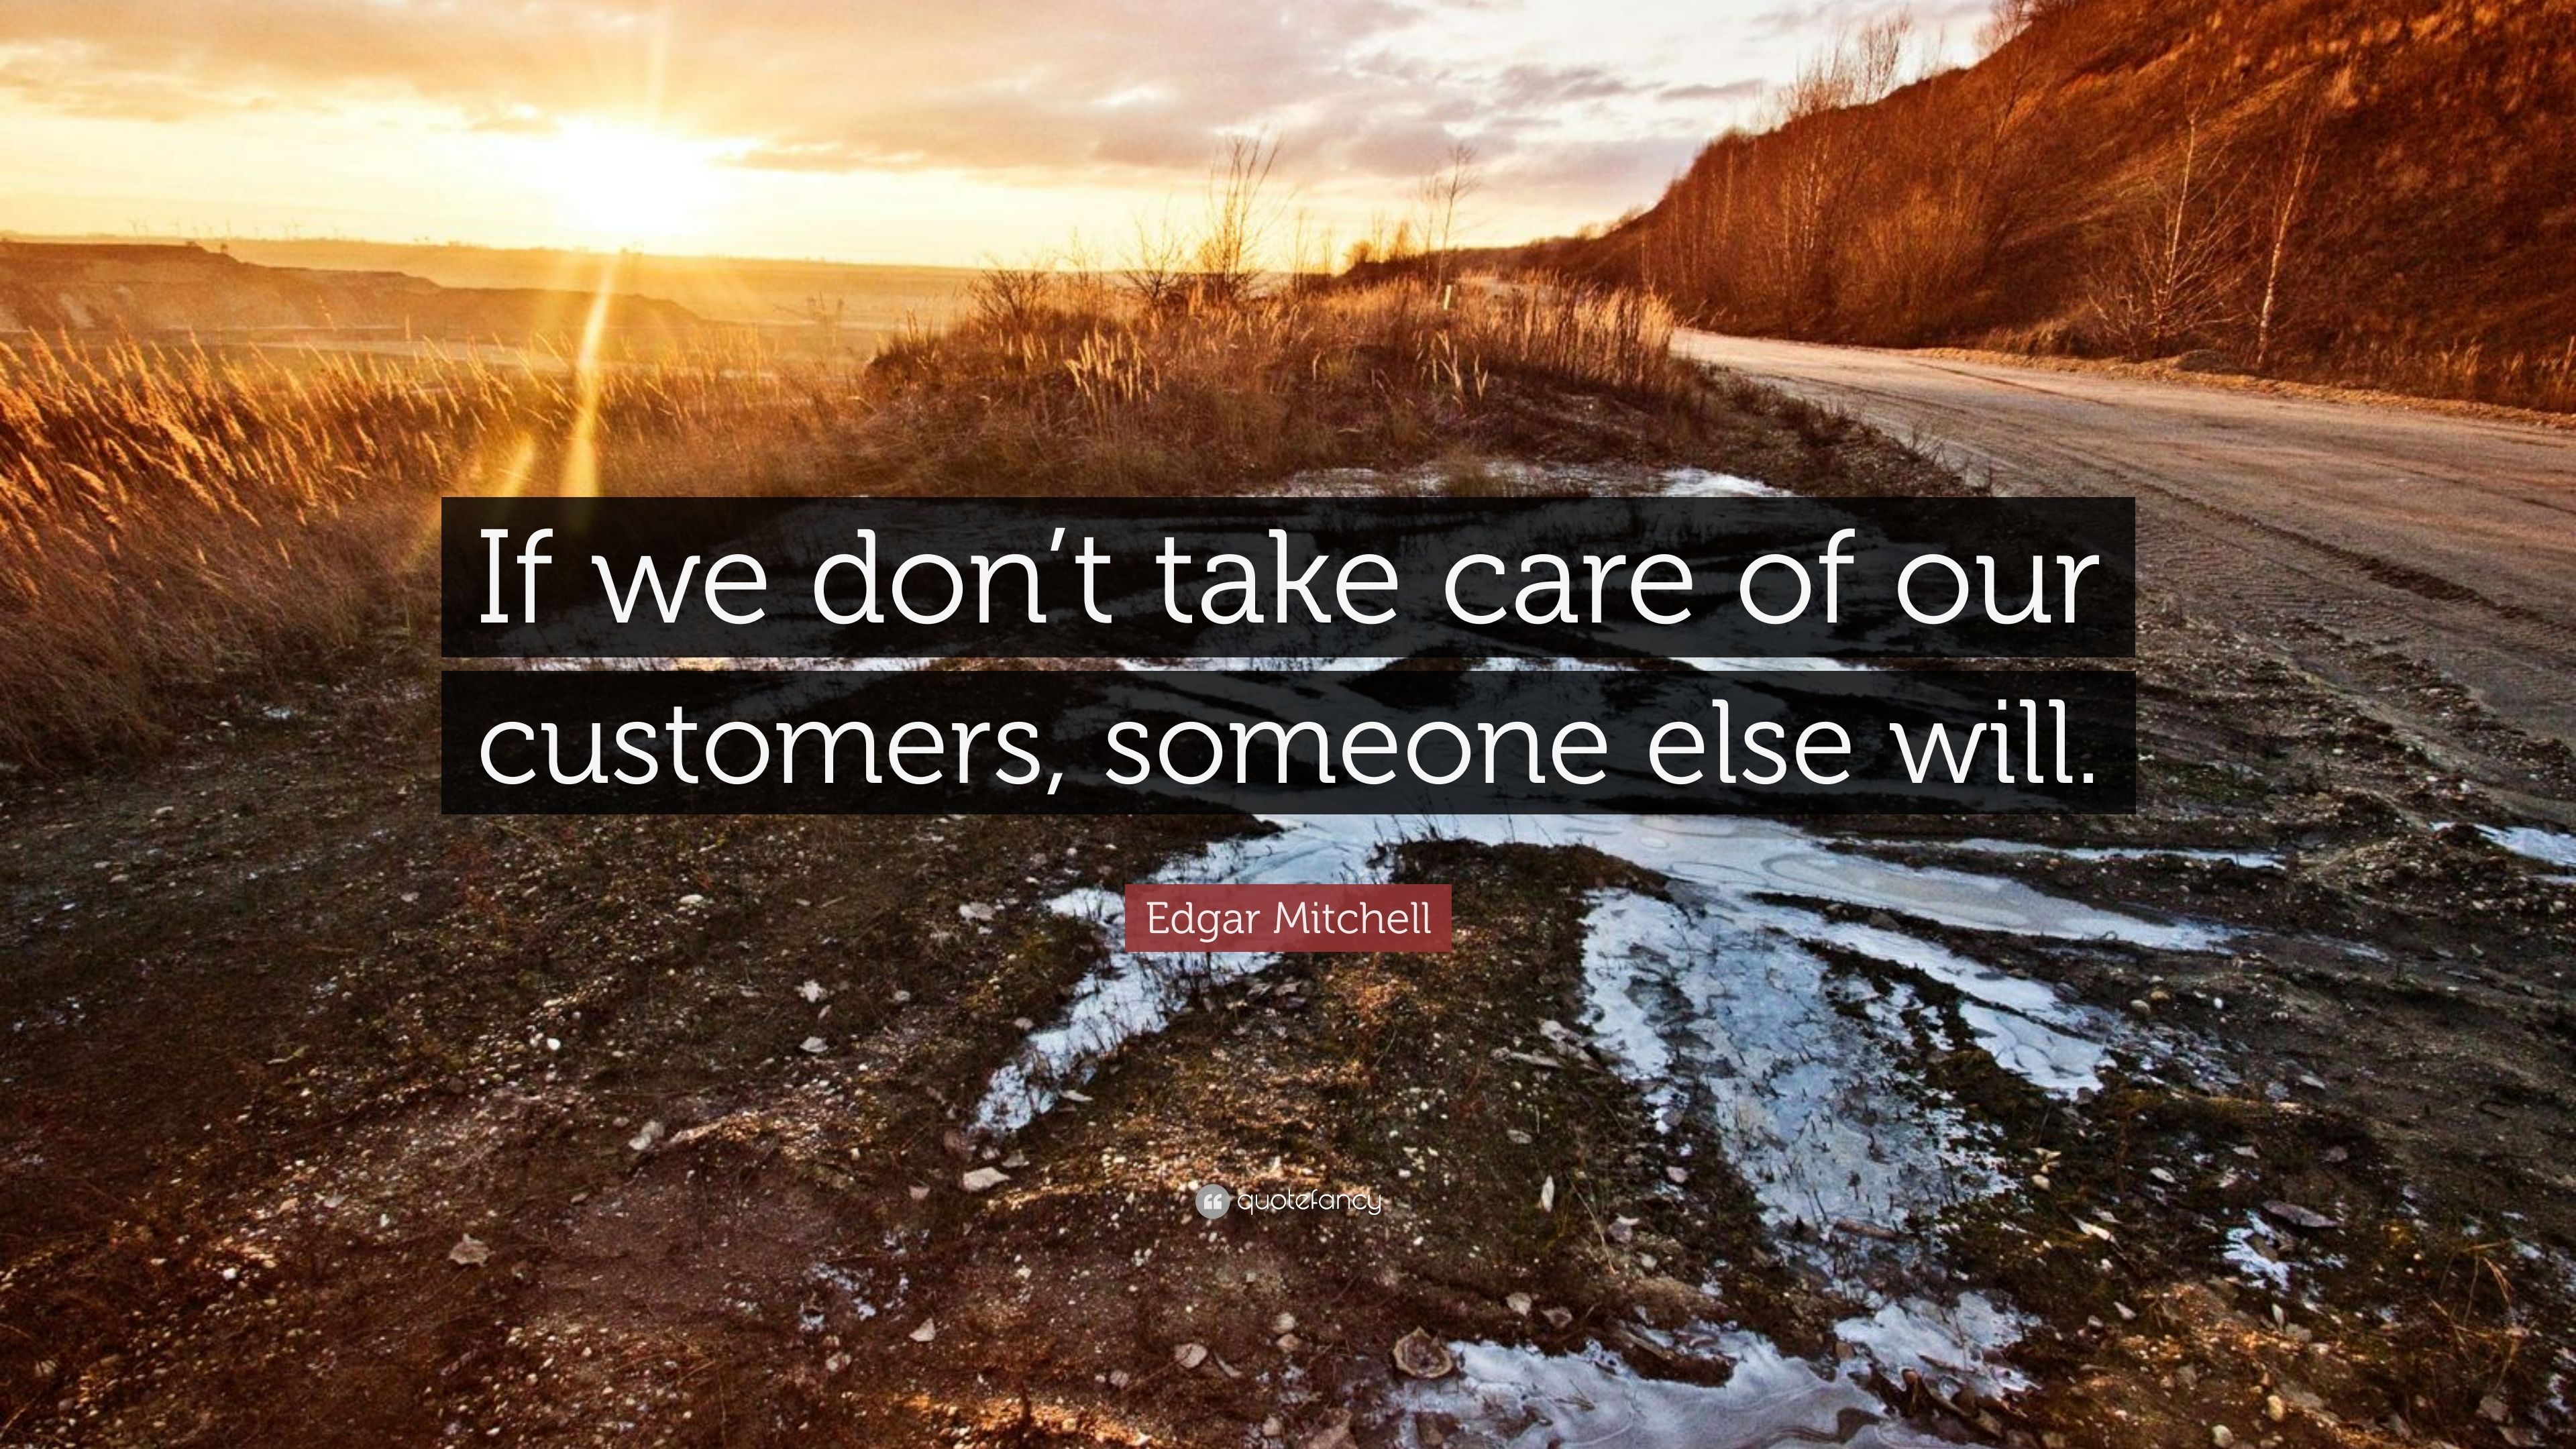 Edgar Mitchell Quote: “If we don't take care of our customers